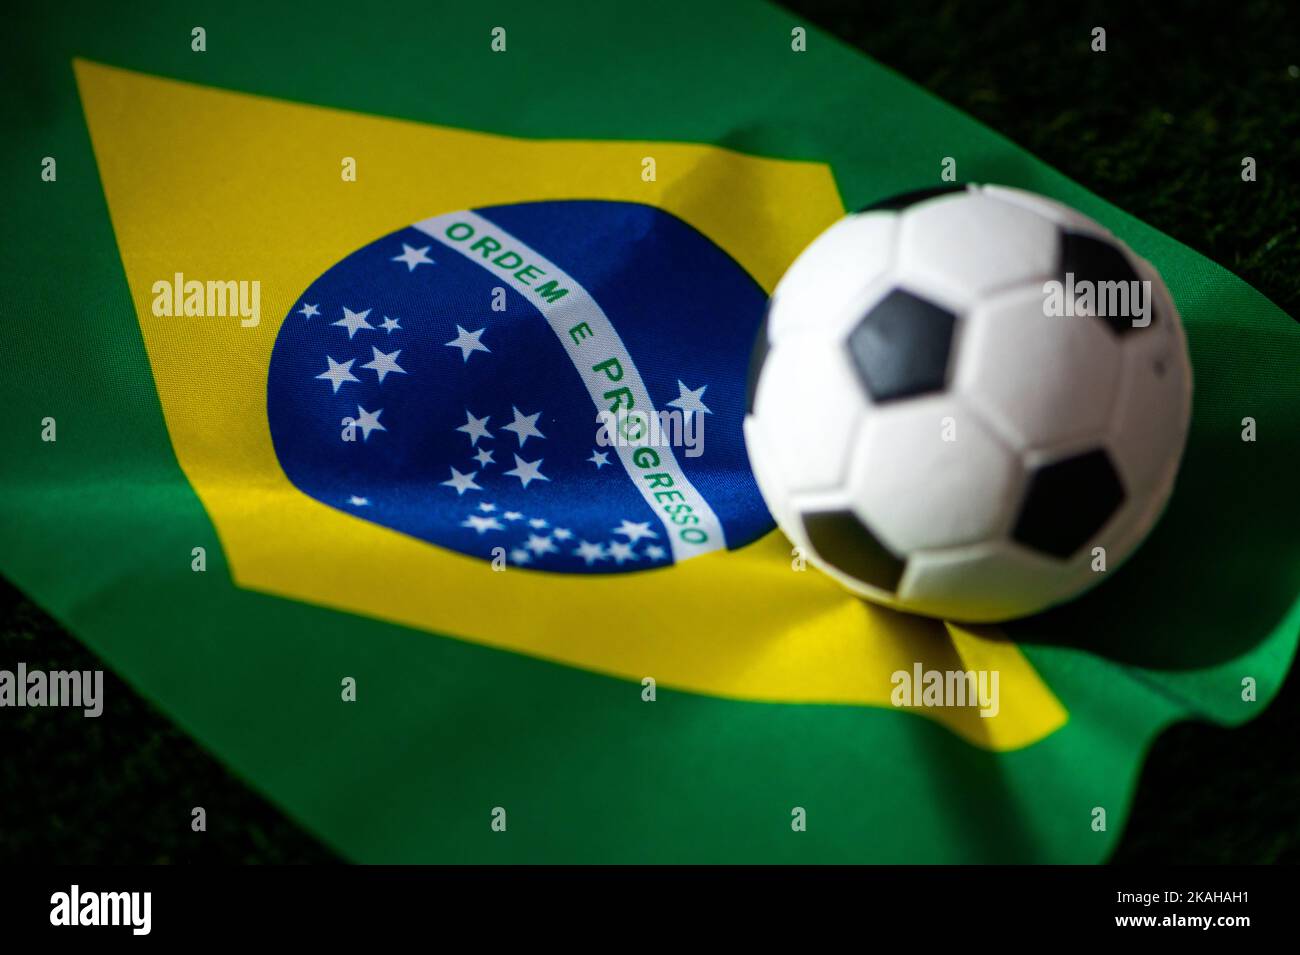 Brazil national football team. National Flag on green grass and soccer ball. Football wallpaper for Championship and Tournament in 2022. World interna Stock Photo